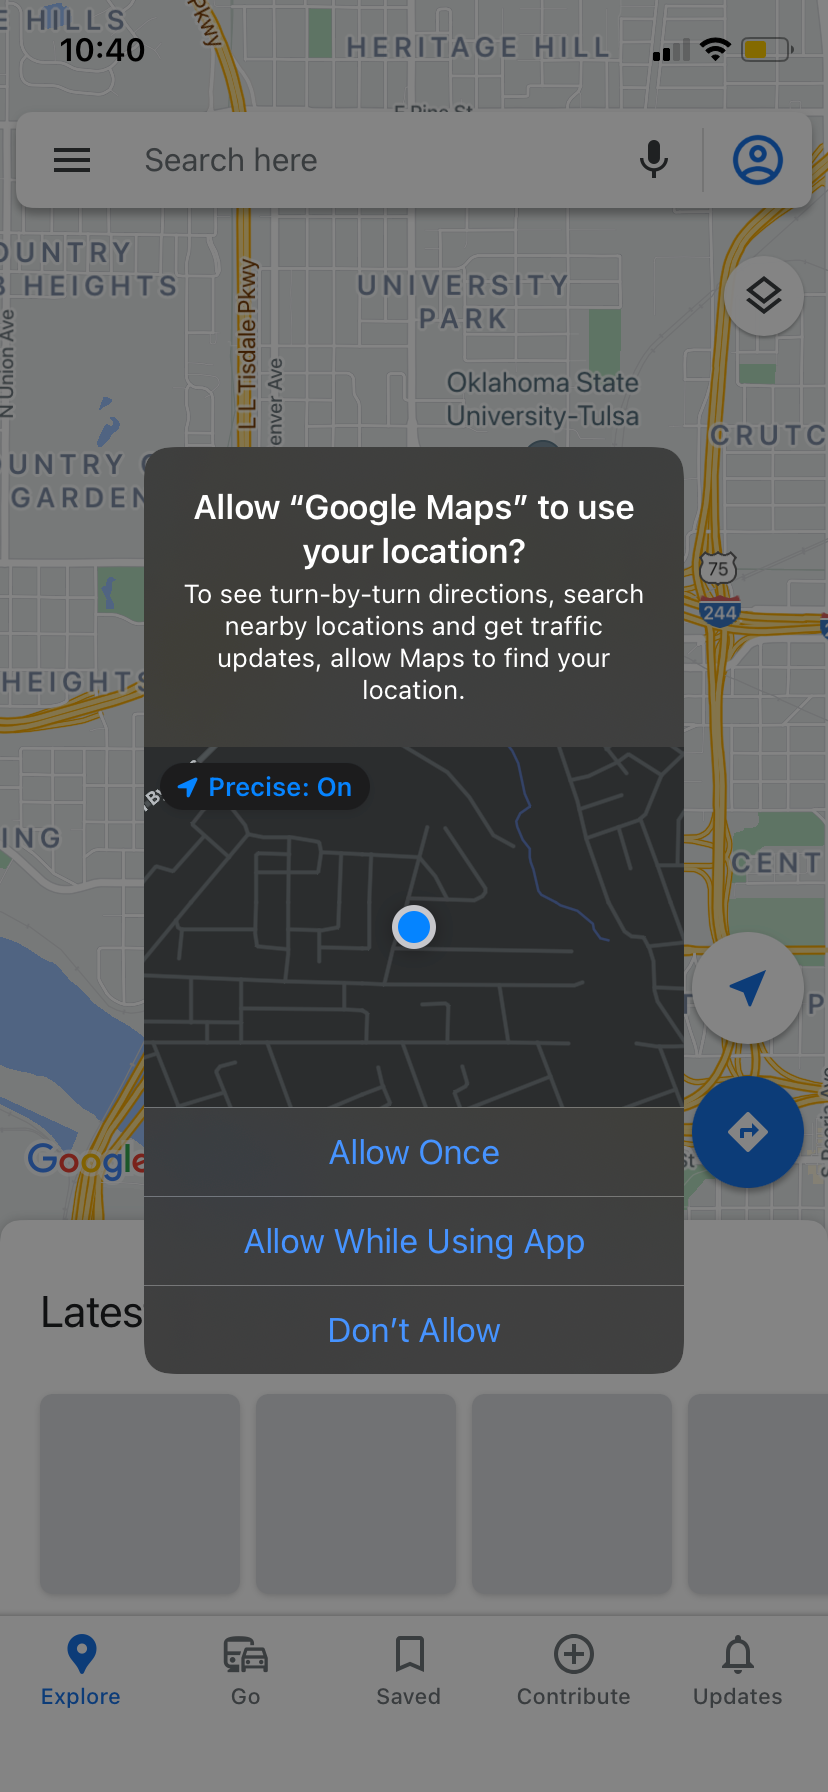 Granting Google Maps permission to use location on iPhone